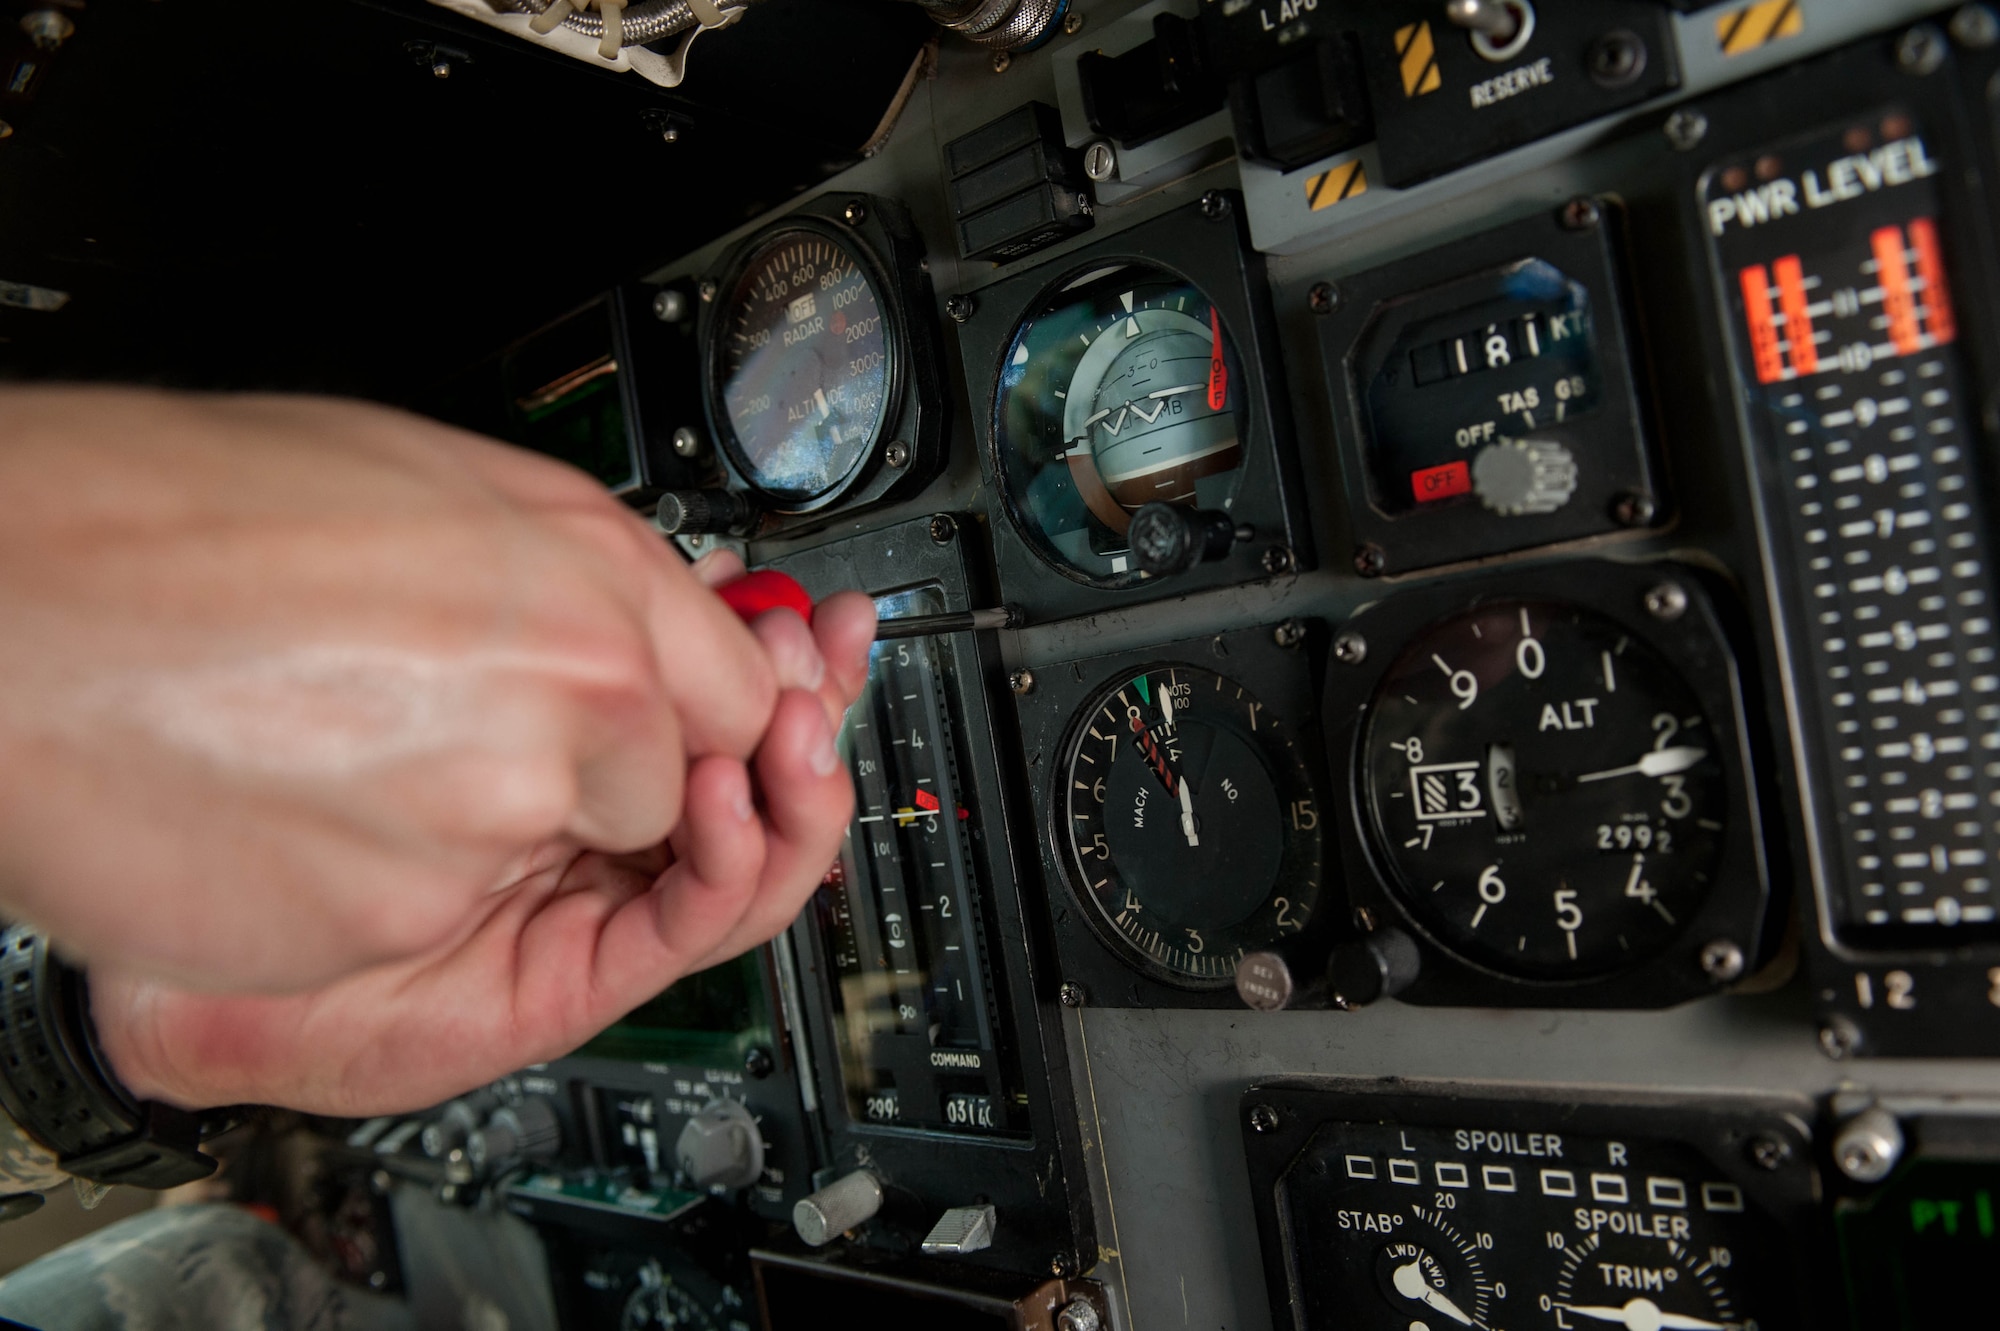 Senior Airman Cody Candrea, 28th Aircraft Maintenance Squadron instrument flight controls technician, adjusts the self contained attitude indicator system in a B-1 cockpit during routine maintenance at Ellsworth Air Force Base, S.D., May 15, 2013. IFC Airmen are tasked to maintain a myriad of mission critical systems on the base’s B-1 bombers, including flight, offensive controls, communications and navigation. (U.S. Air Force photo by Airman 1st Class Zachary Hada/Released)